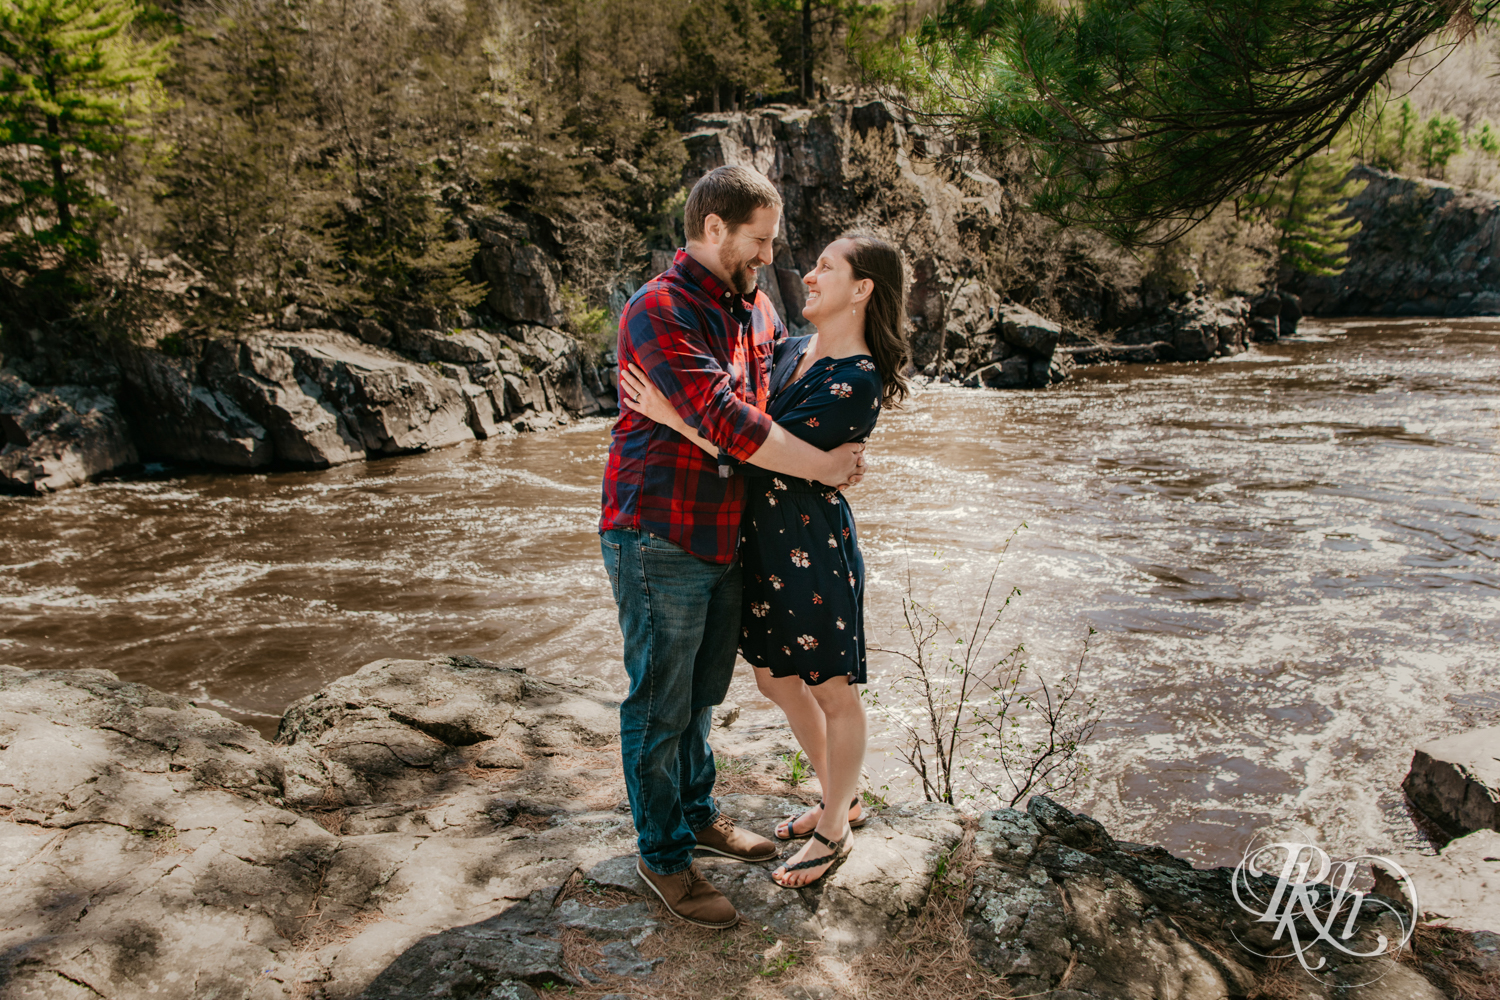 Man in flannel and jeans and woman in dress kiss on cliff over river in Taylor's Falls, Minnesota.